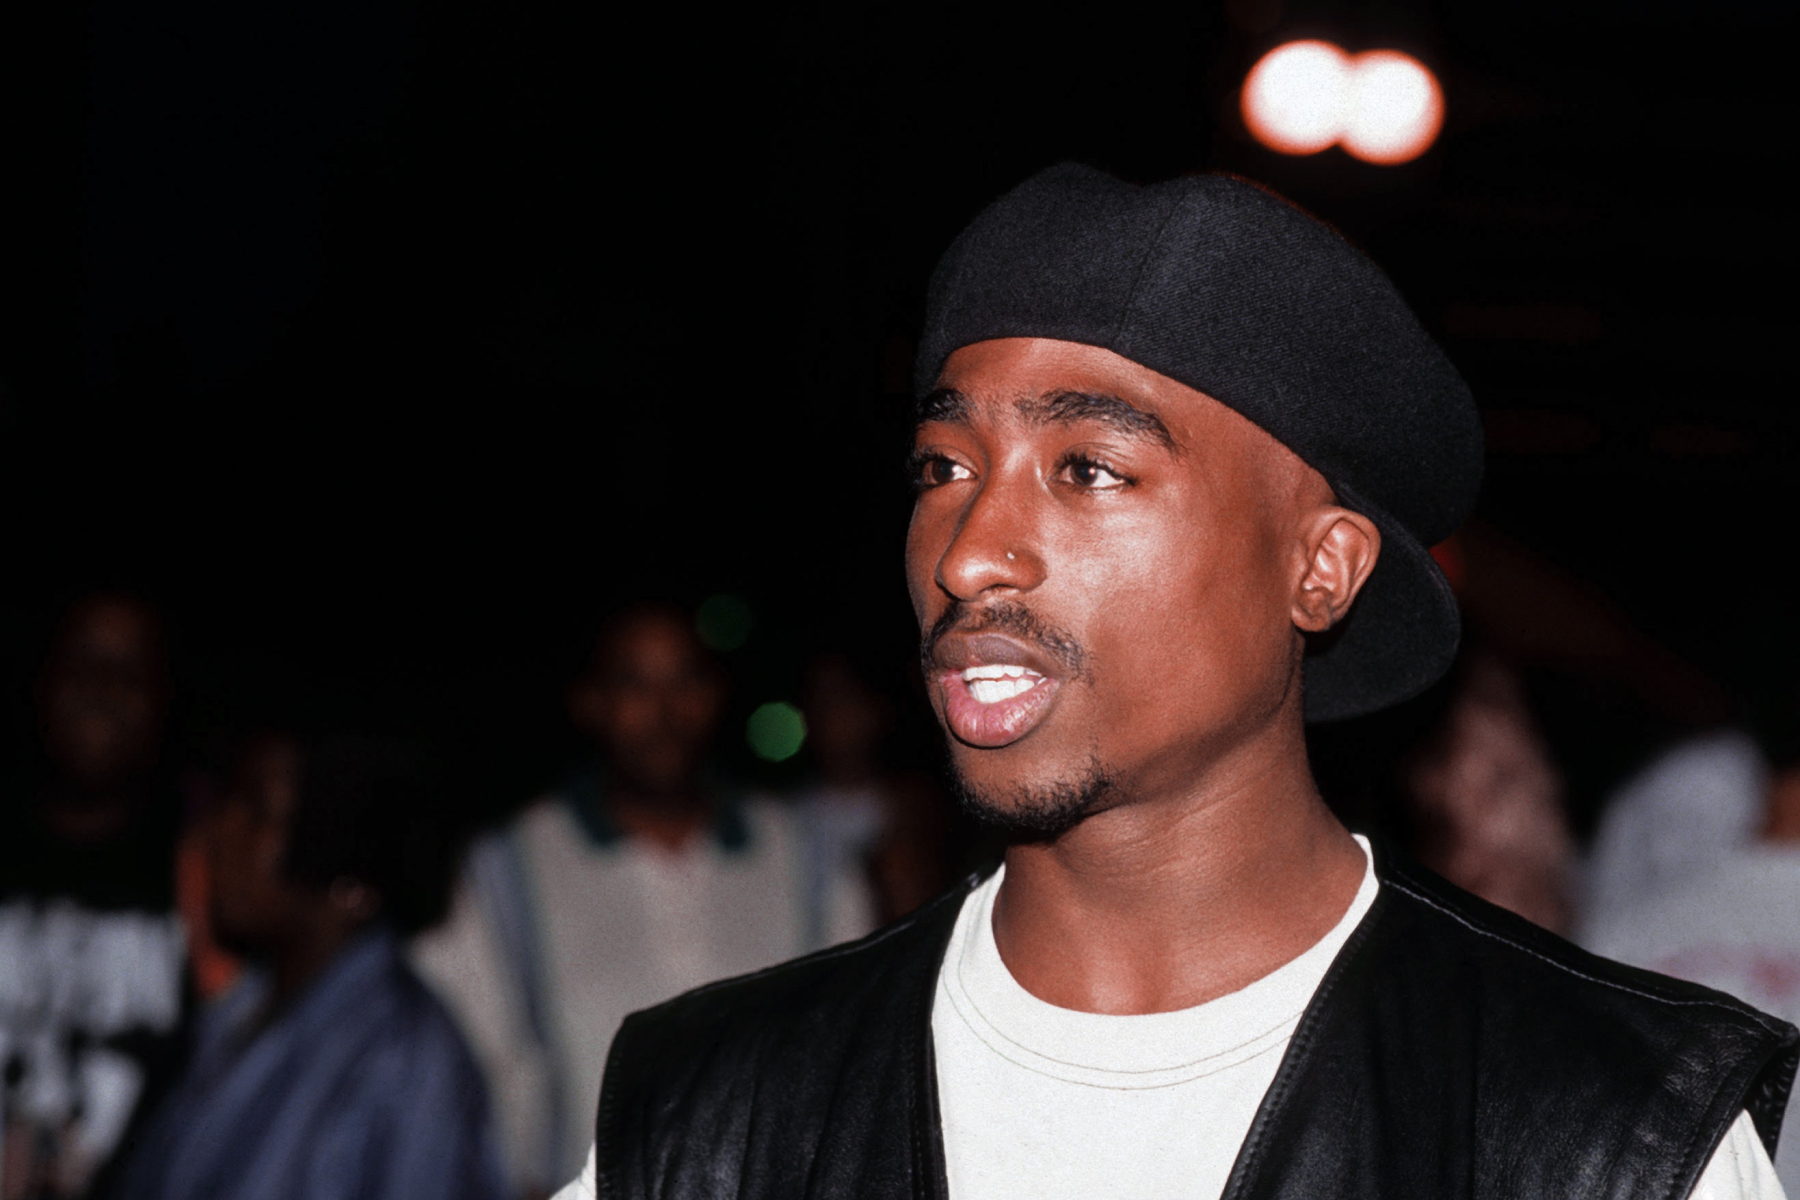 Rare Tupac Photos From Debut Album Release Party to Be Sold as NFTs